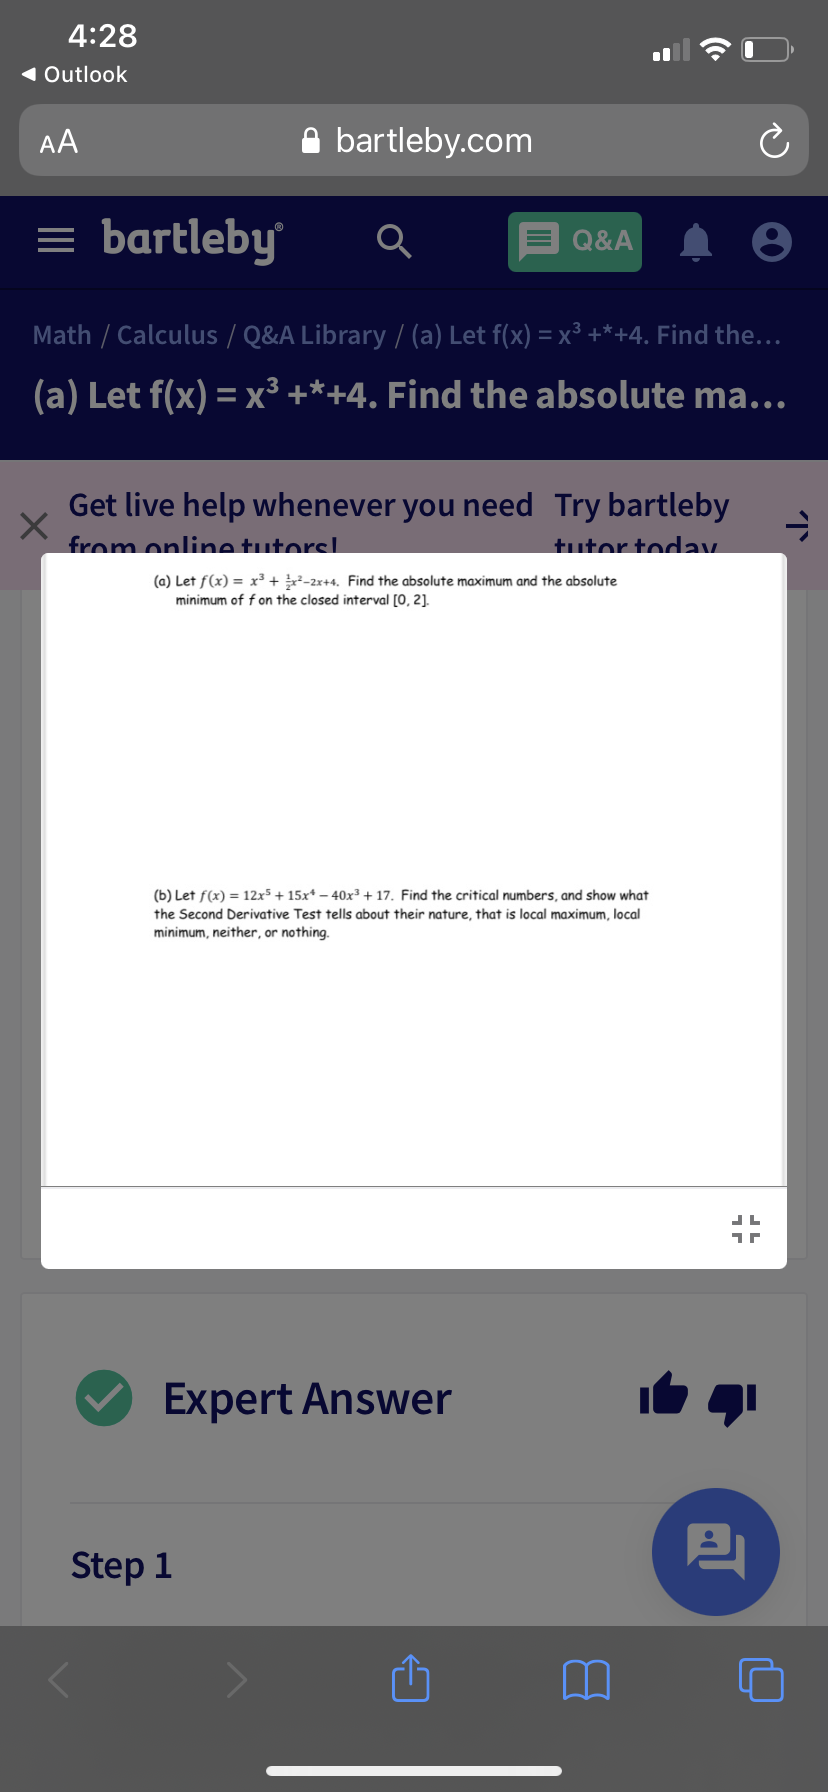 4:28
1 Outlook
AA
A bartleby.com
= bartleby
Q&A
Math / Calculus / Q&A Library / (a) Let f(x) = x³ +*+4. Find the...
(a) Let f(x) = x³ +*+4. Find the absolute ma...
Get live help whenever you need Try bartleby
from online tutorsL
tutor today
(a) Let f(x) = x³ + -2x+4. Find the absolute maximum and the absolute
minimum of f on the closed interval [0, 2].
(b) Let f(x) = 12x5 + 15x* – 40x³ + 17. Find the critical numbers, and show what
the Second Derivative Test tells about their nature, that is local maximum, local
minimum, neither, or nothing.
Expert Answer
Step 1
